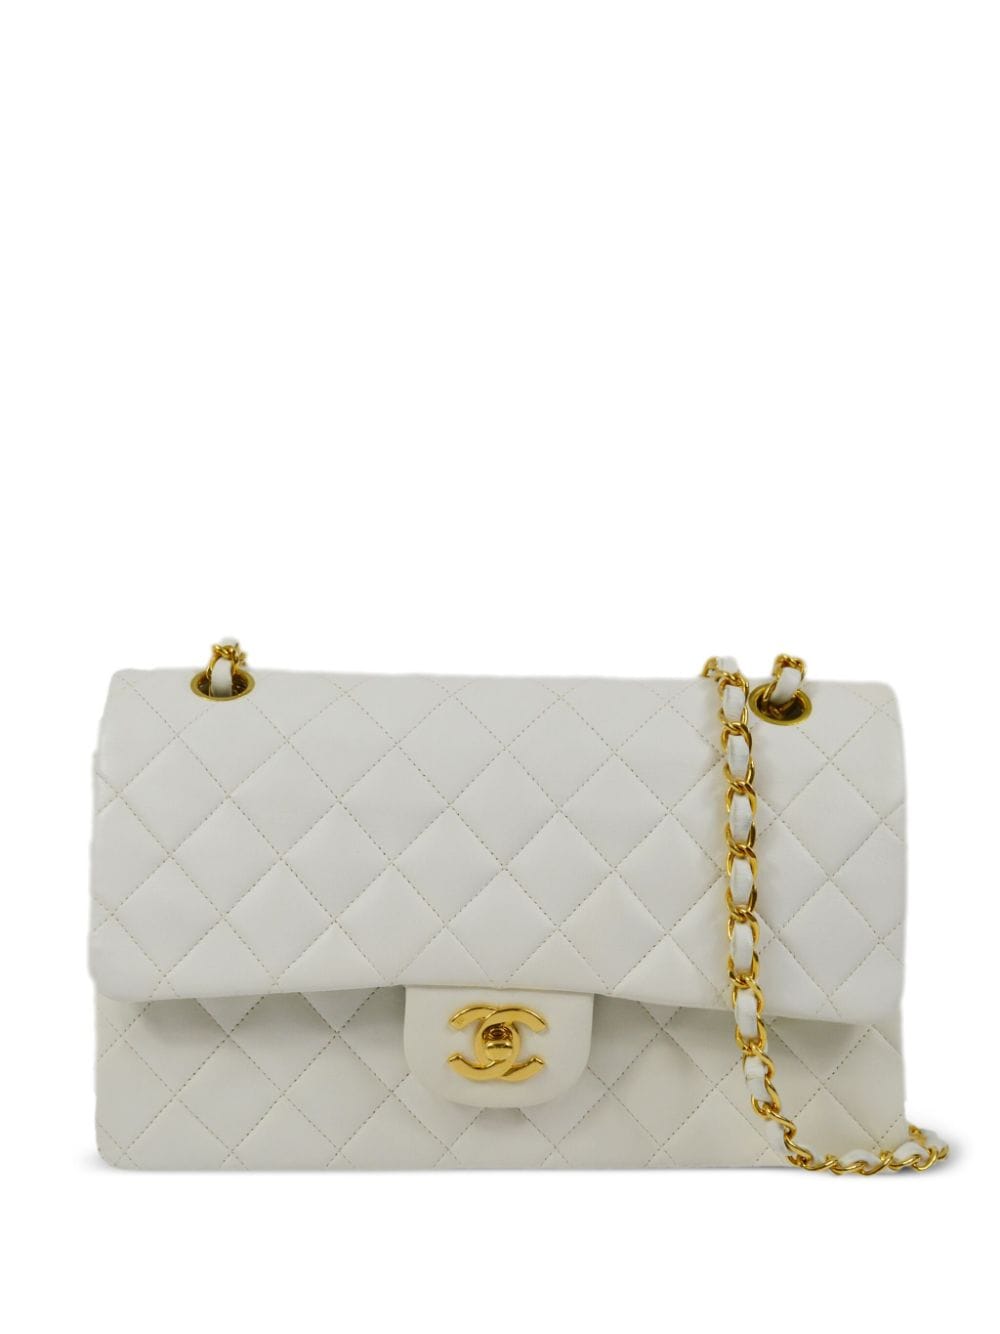 Pre-owned Chanel 1998 Medium Double Flap Shoulder Bag In White